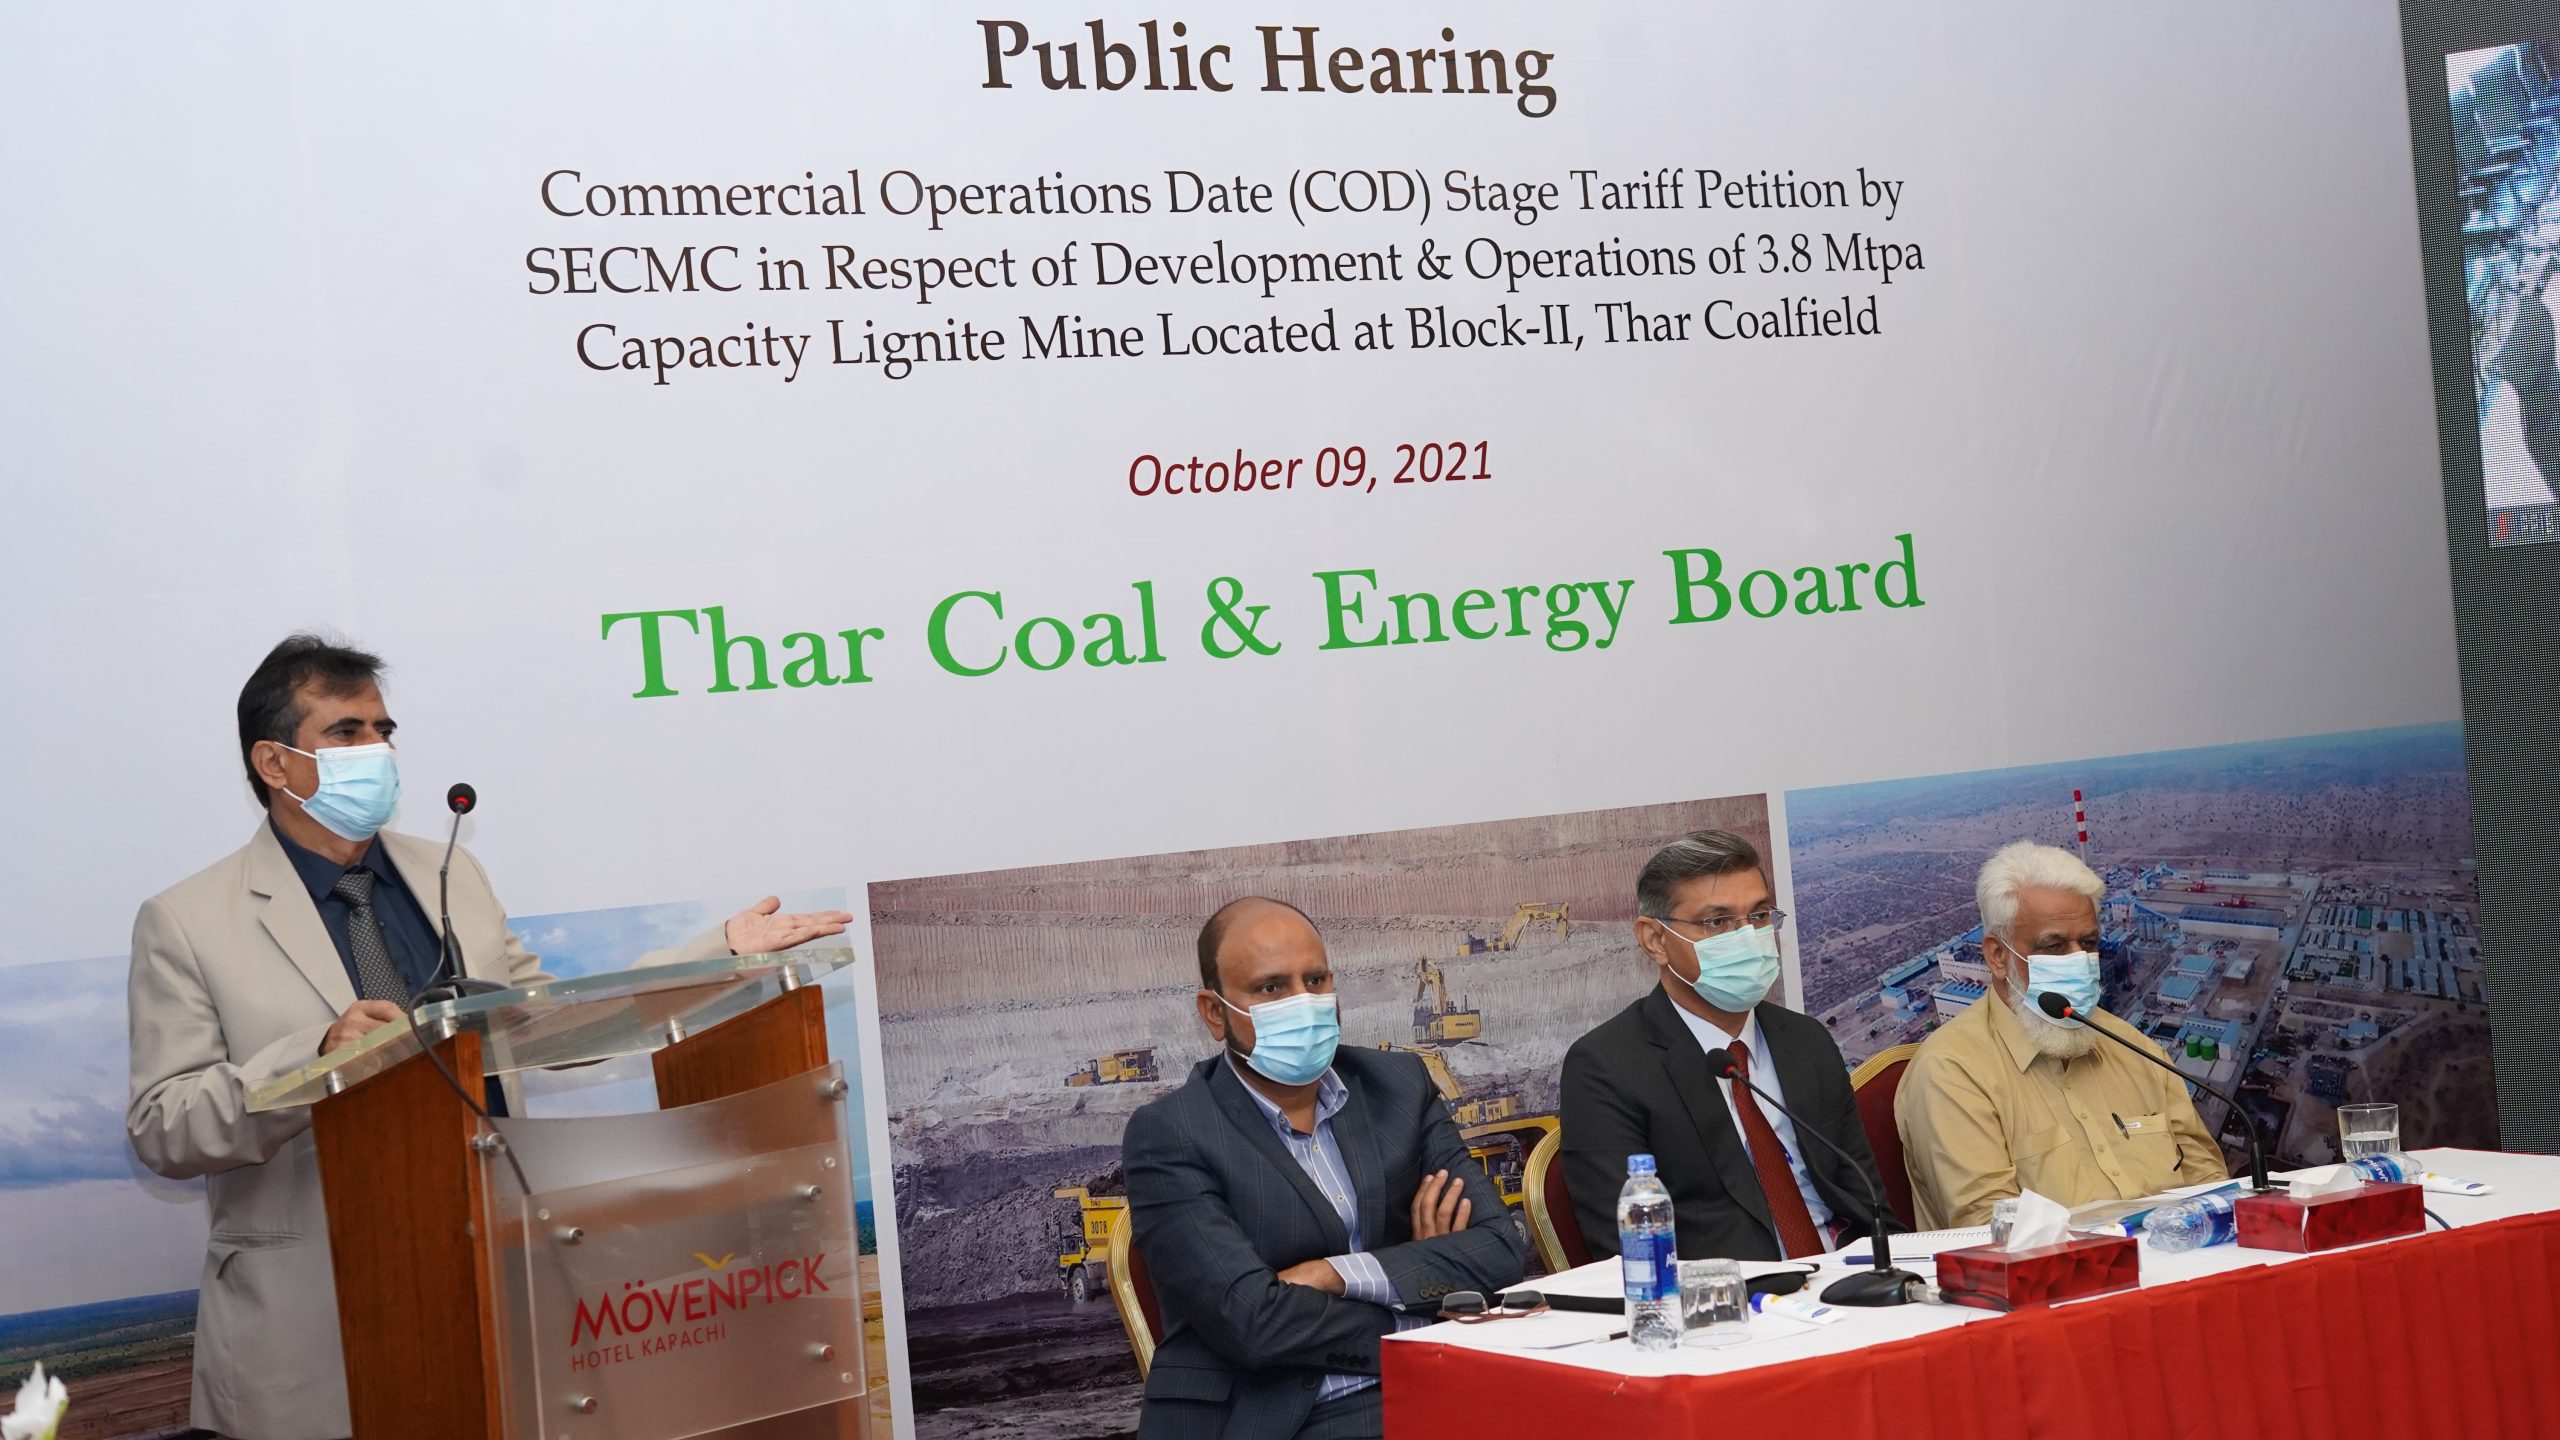 Public Hearing of SECMC's COD Stage Tariff Petition for 3.8 Mtpa capacity mine at Block-II, Thar Coalfield